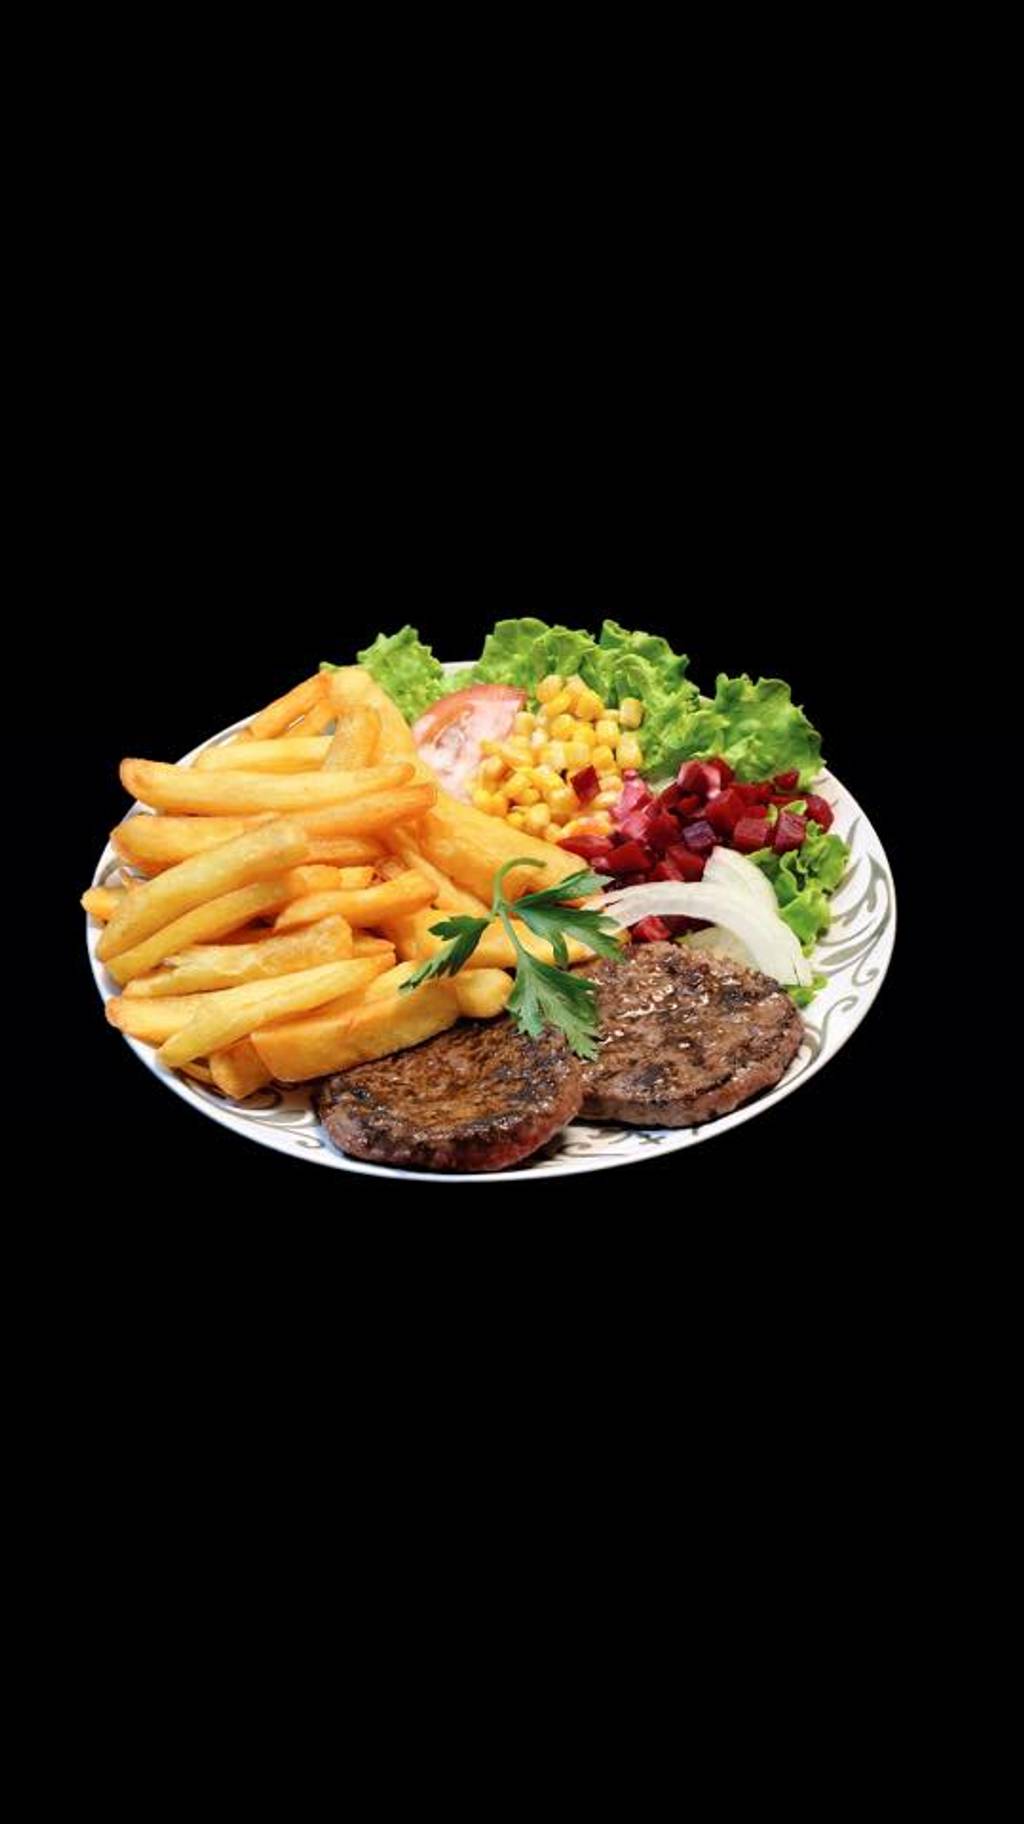 L'Orientis Fast-food Limoges - Cuisine Food Dish French fries Junk food